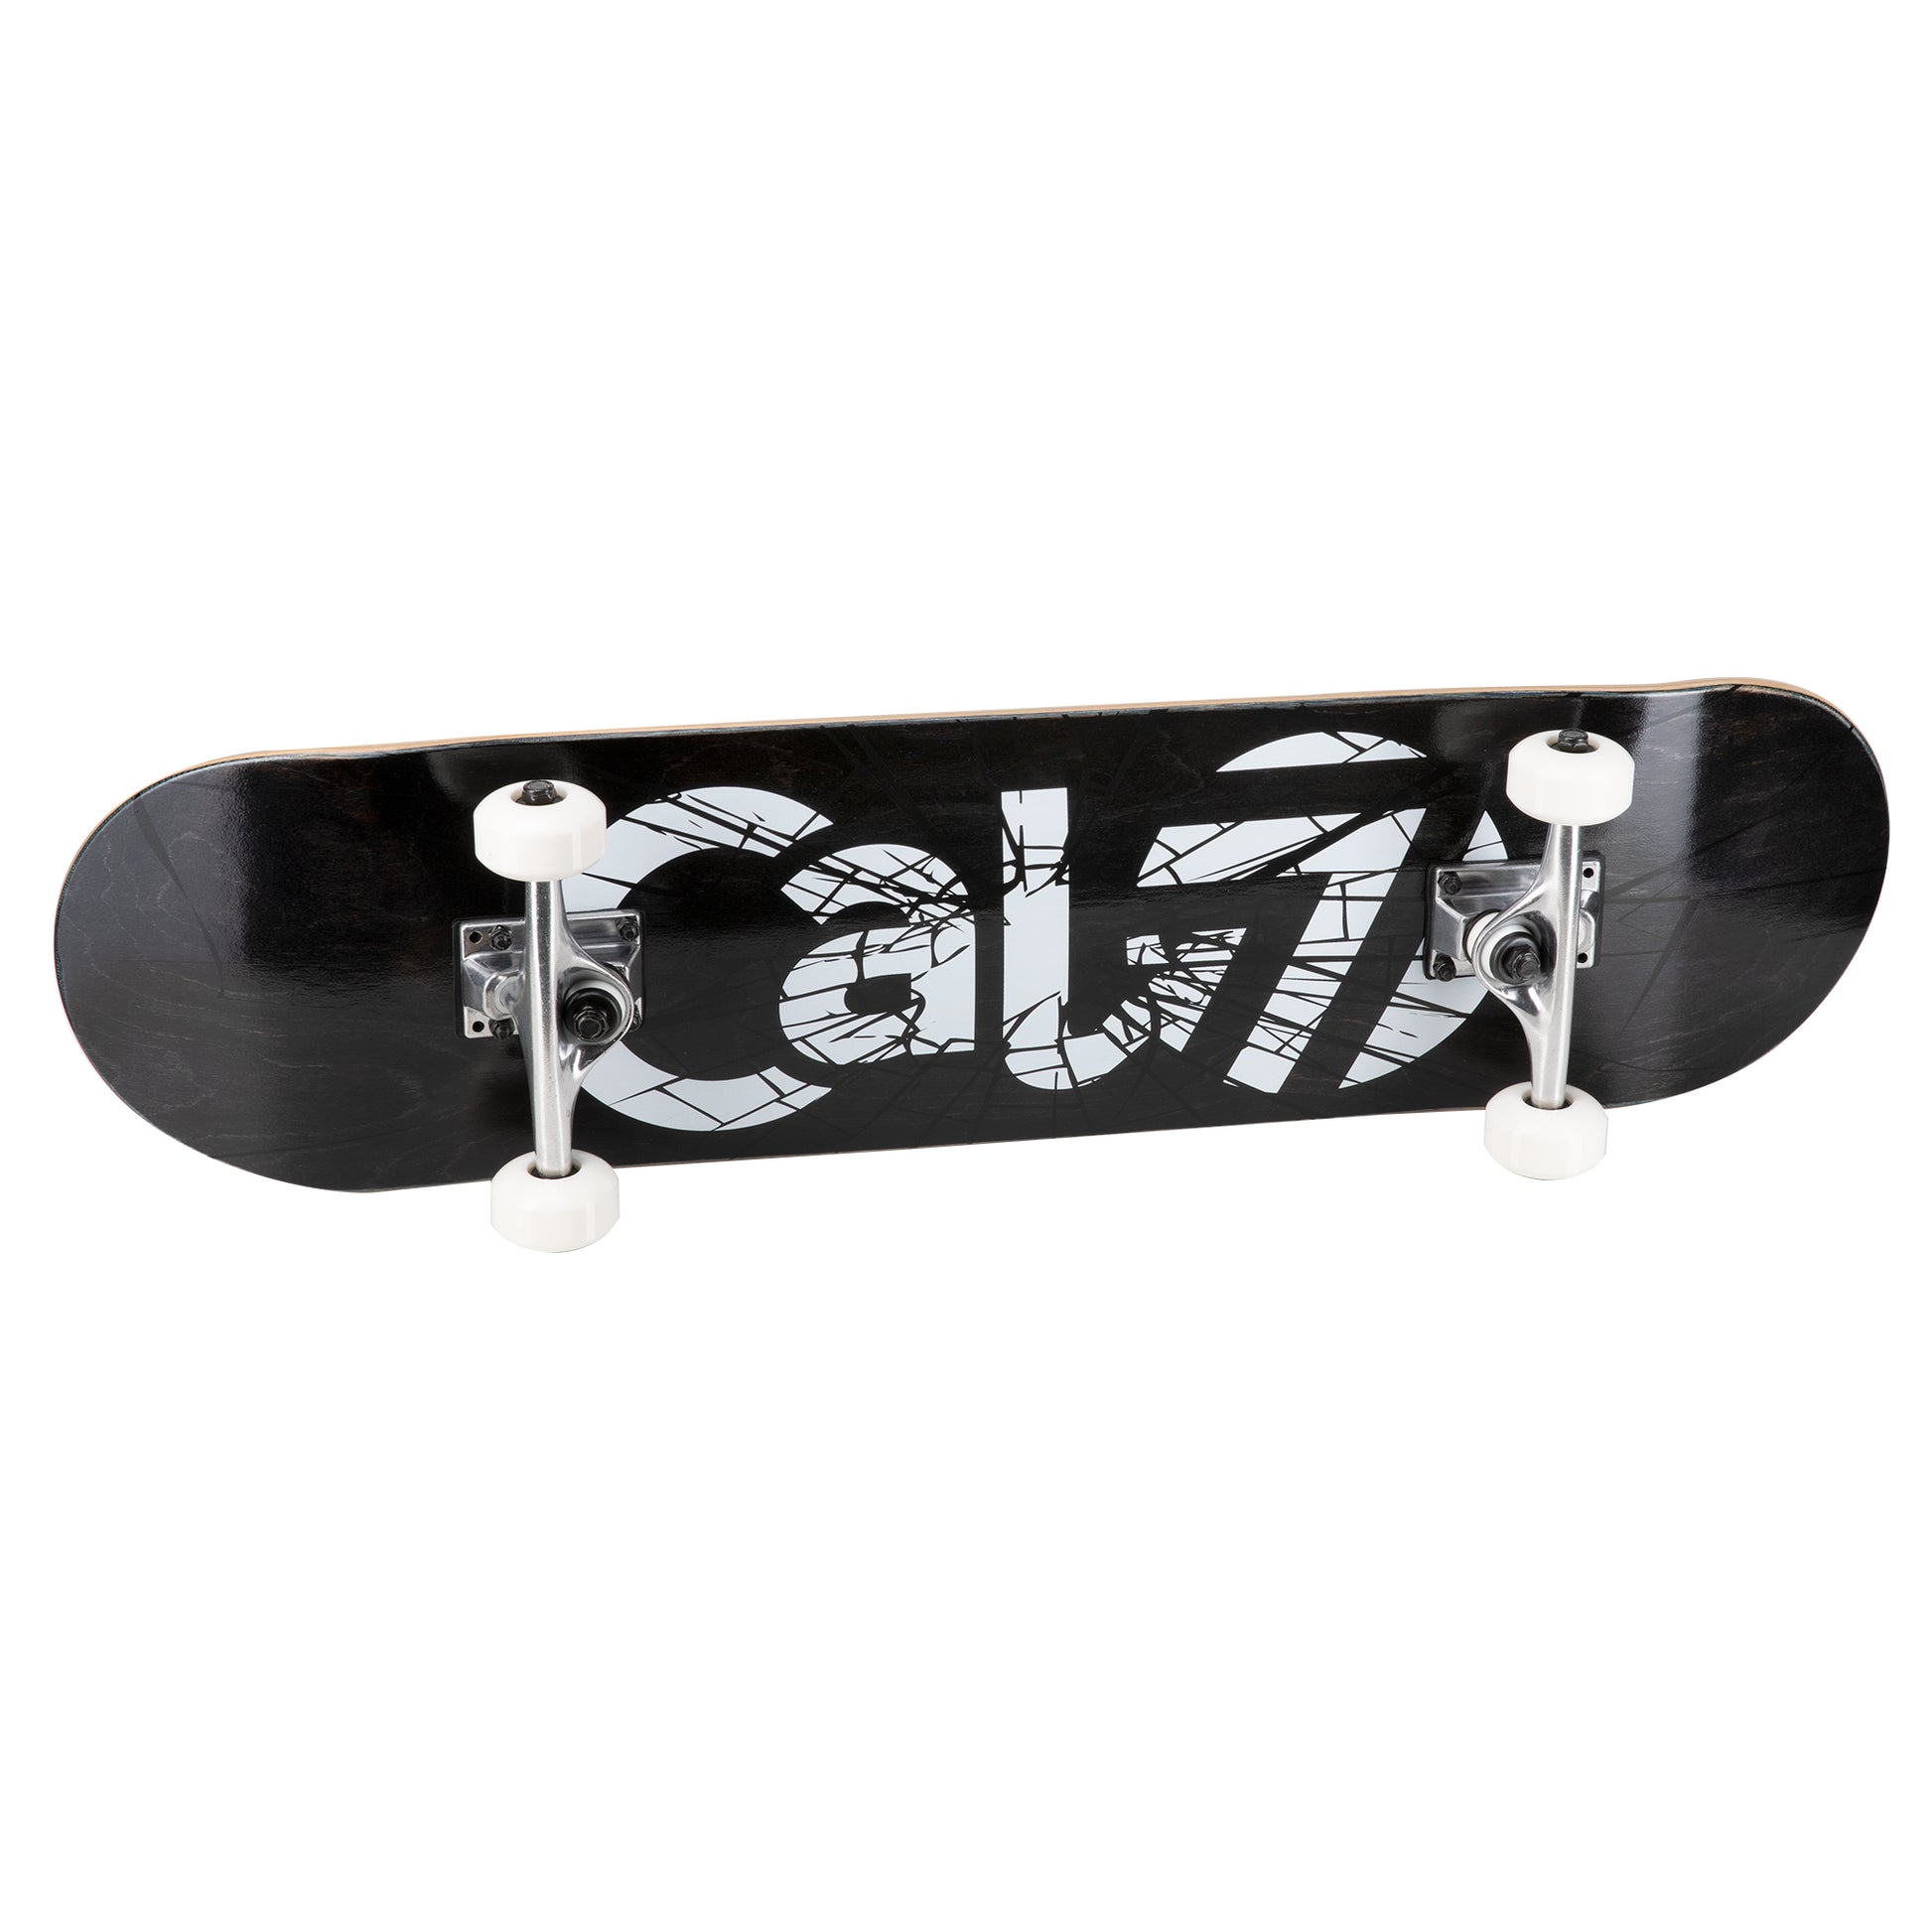 ): Cal 7 complete 8-inch Heist skateboard with black deck and glass shattered graphic